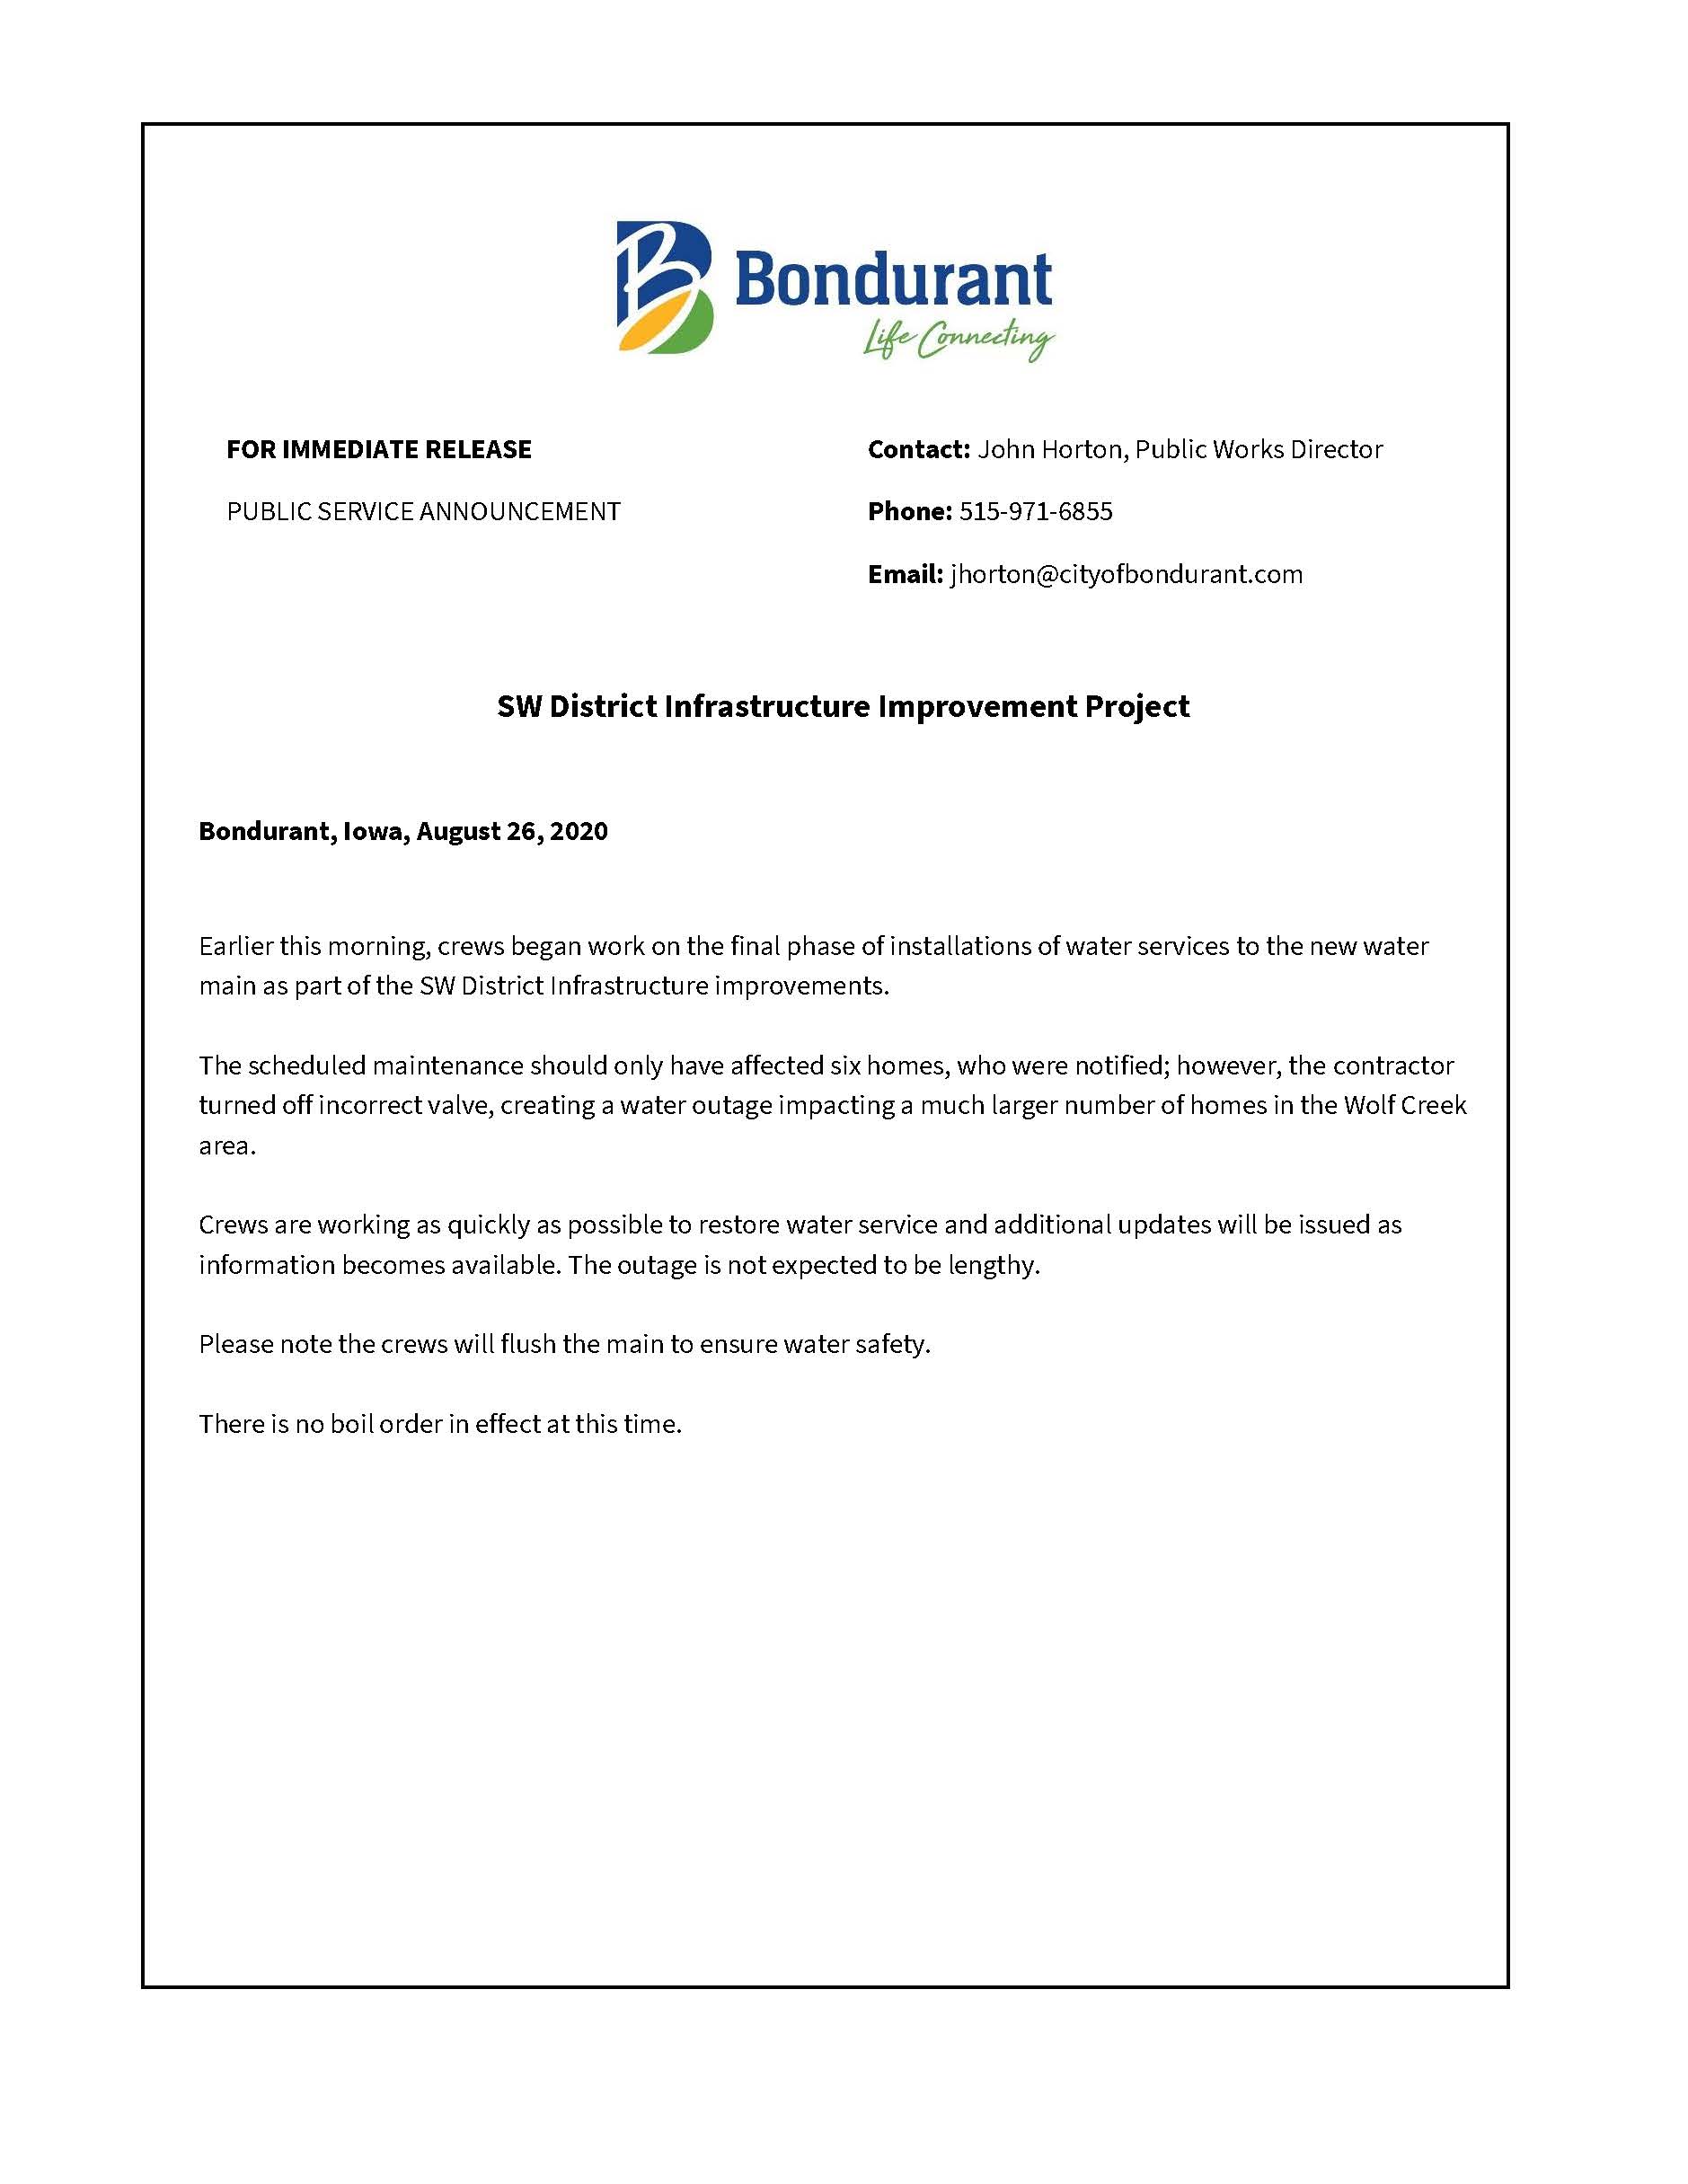 Water Outage Notice